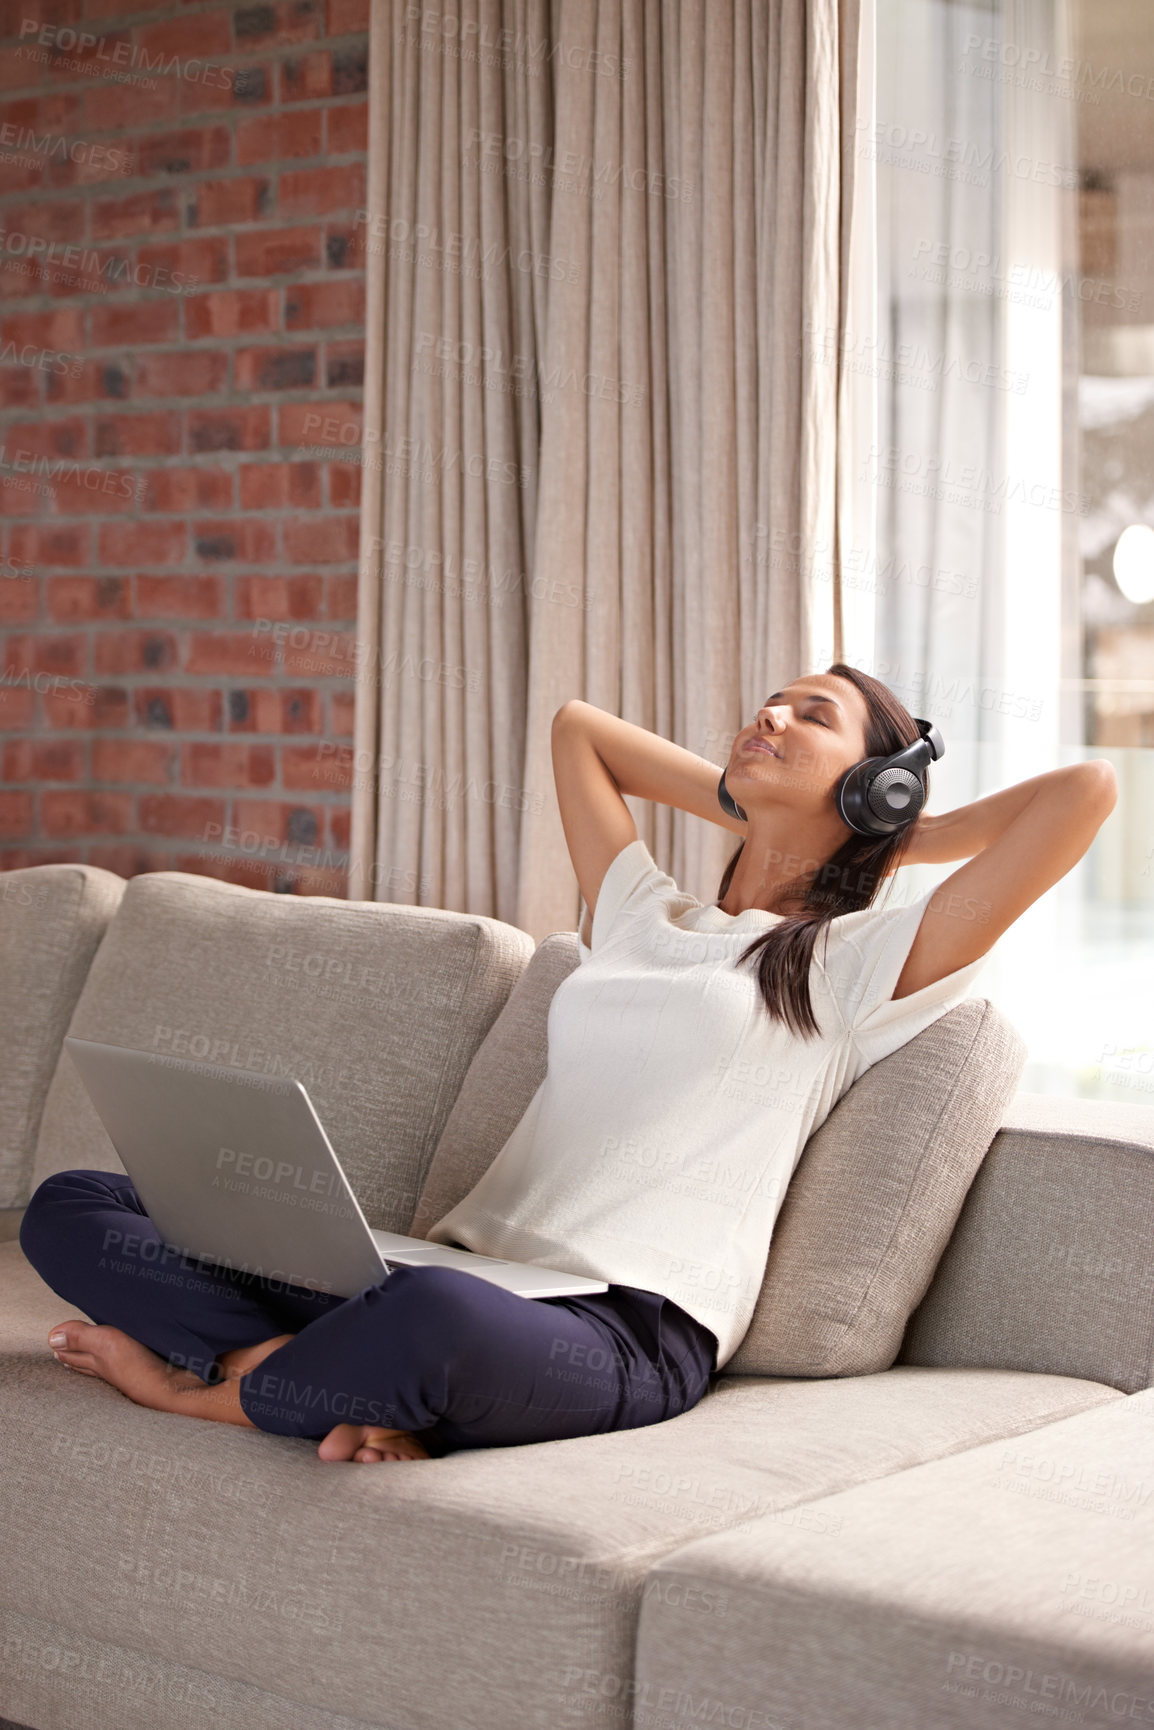 Buy stock photo Shot of an attractive young woman listening to music on her laptop at home